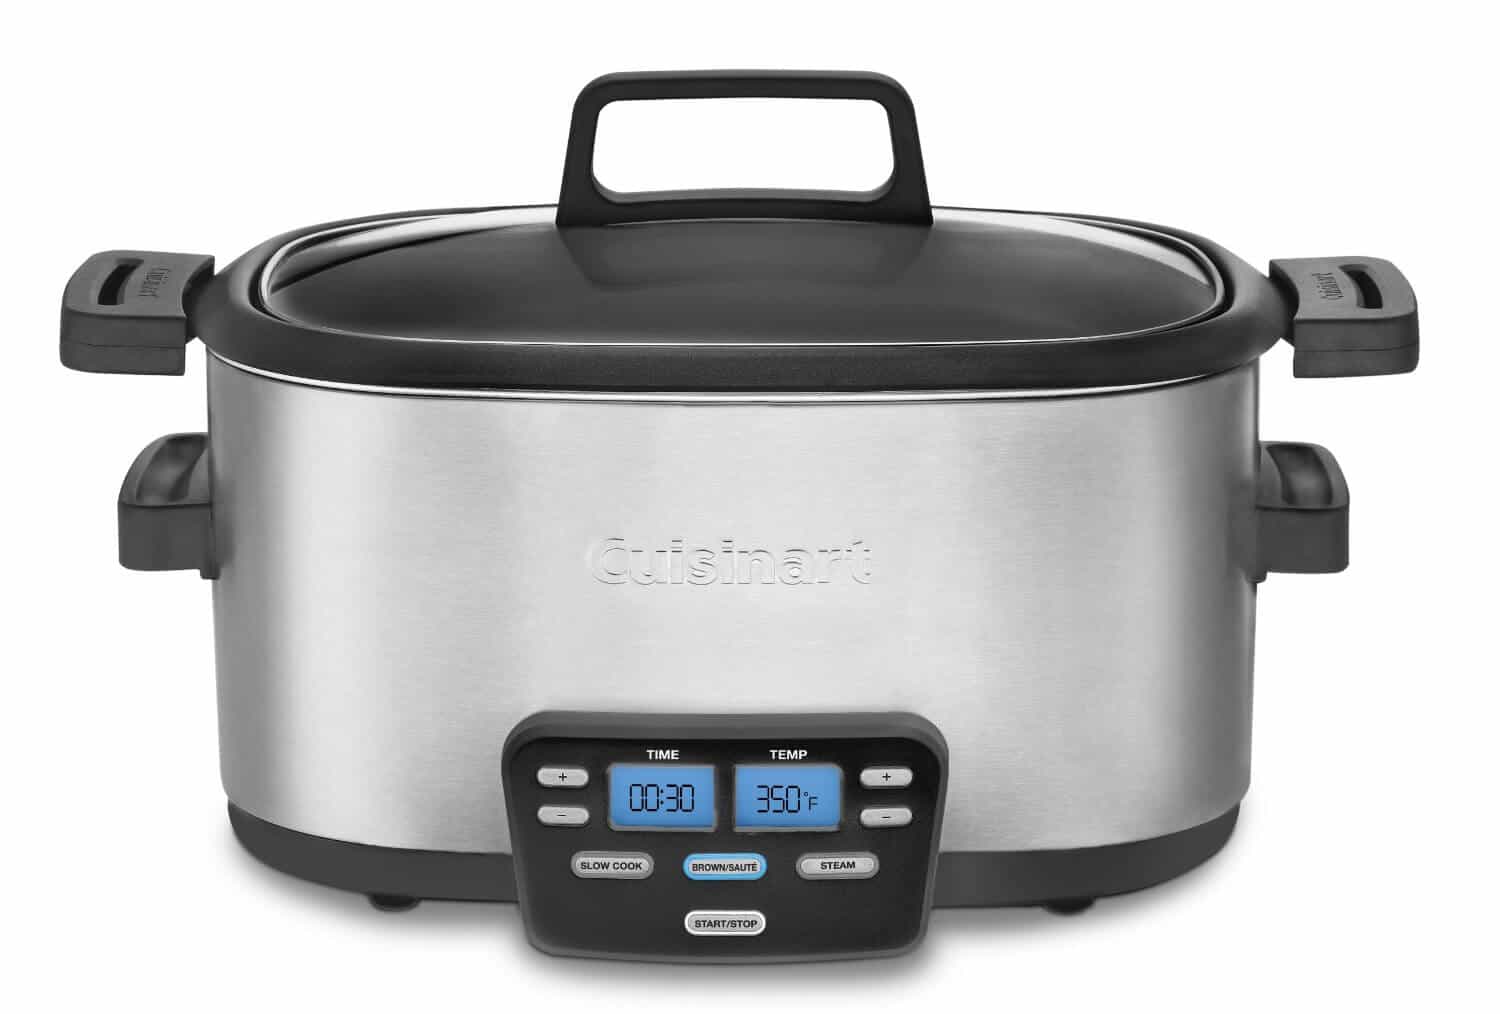 Cuisinart MSC 800 7 Quart 4 in 1 Cook Central Multicooker Review